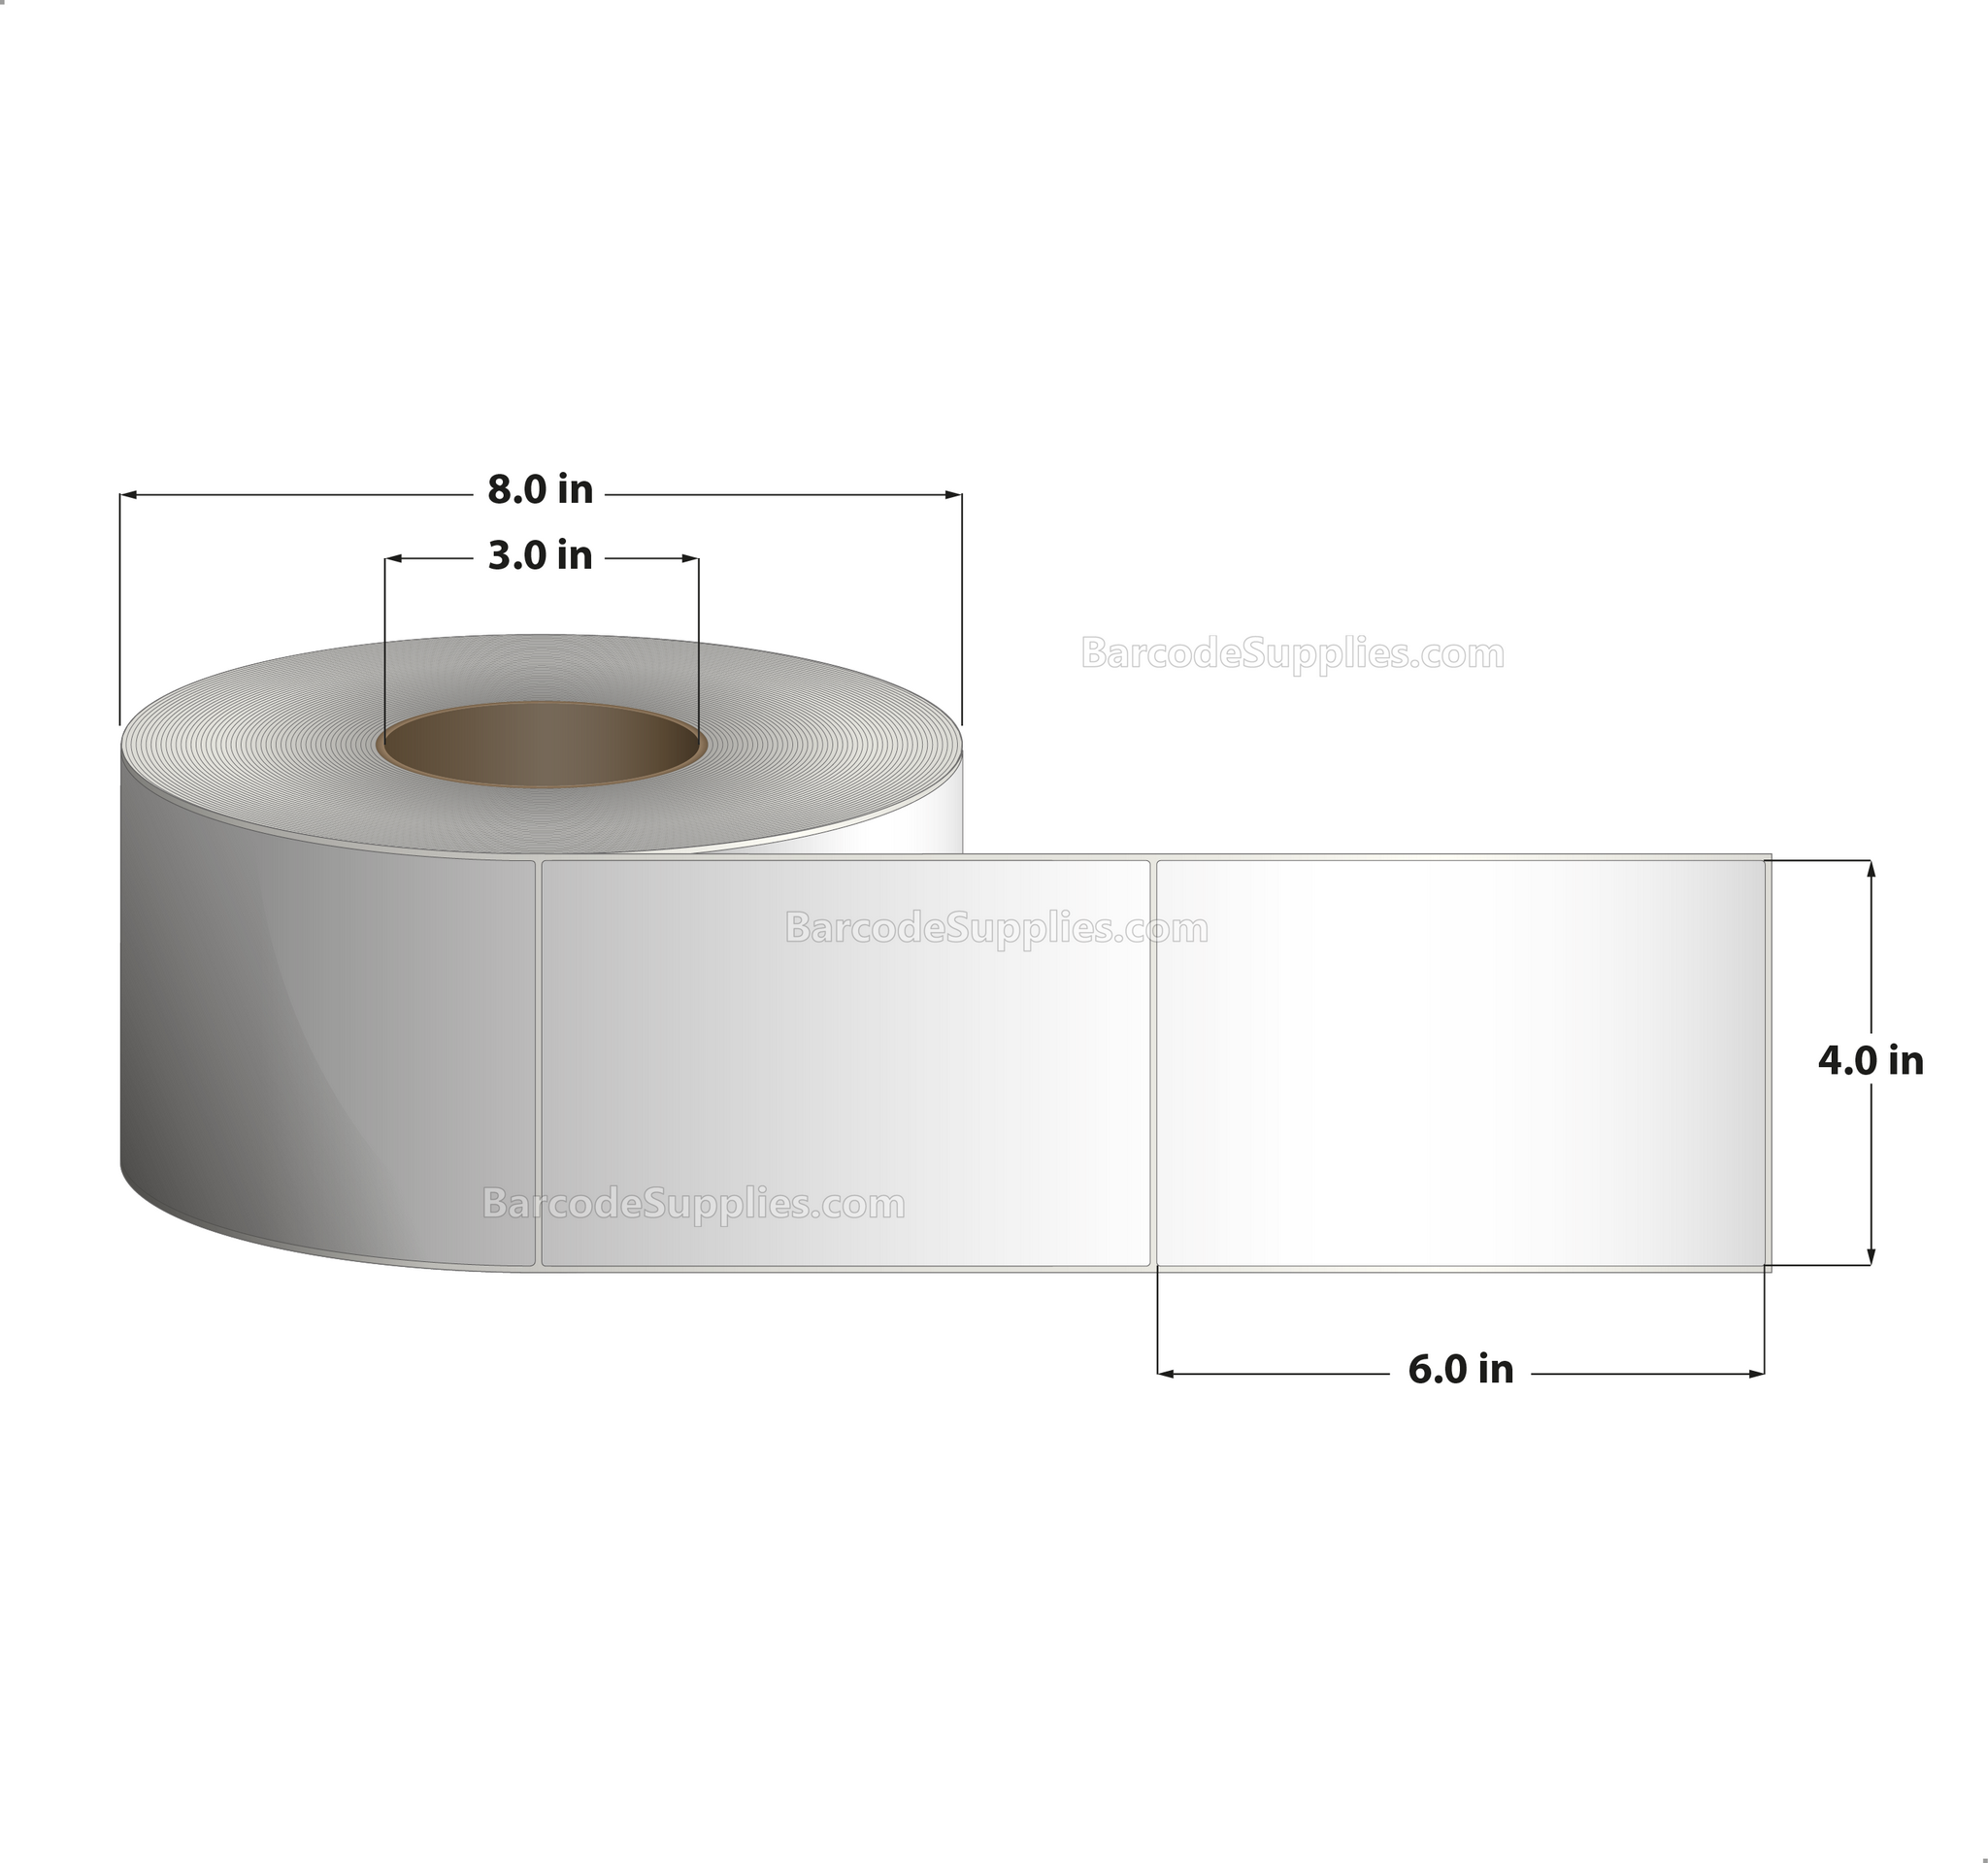 4 x 6 Direct Thermal White Labels With Acrylic Adhesive - No Perforation - 1000 Labels Per Roll - Carton Of 4 Rolls - 4000 Labels Total - MPN: RDS-4-6-1000-NP